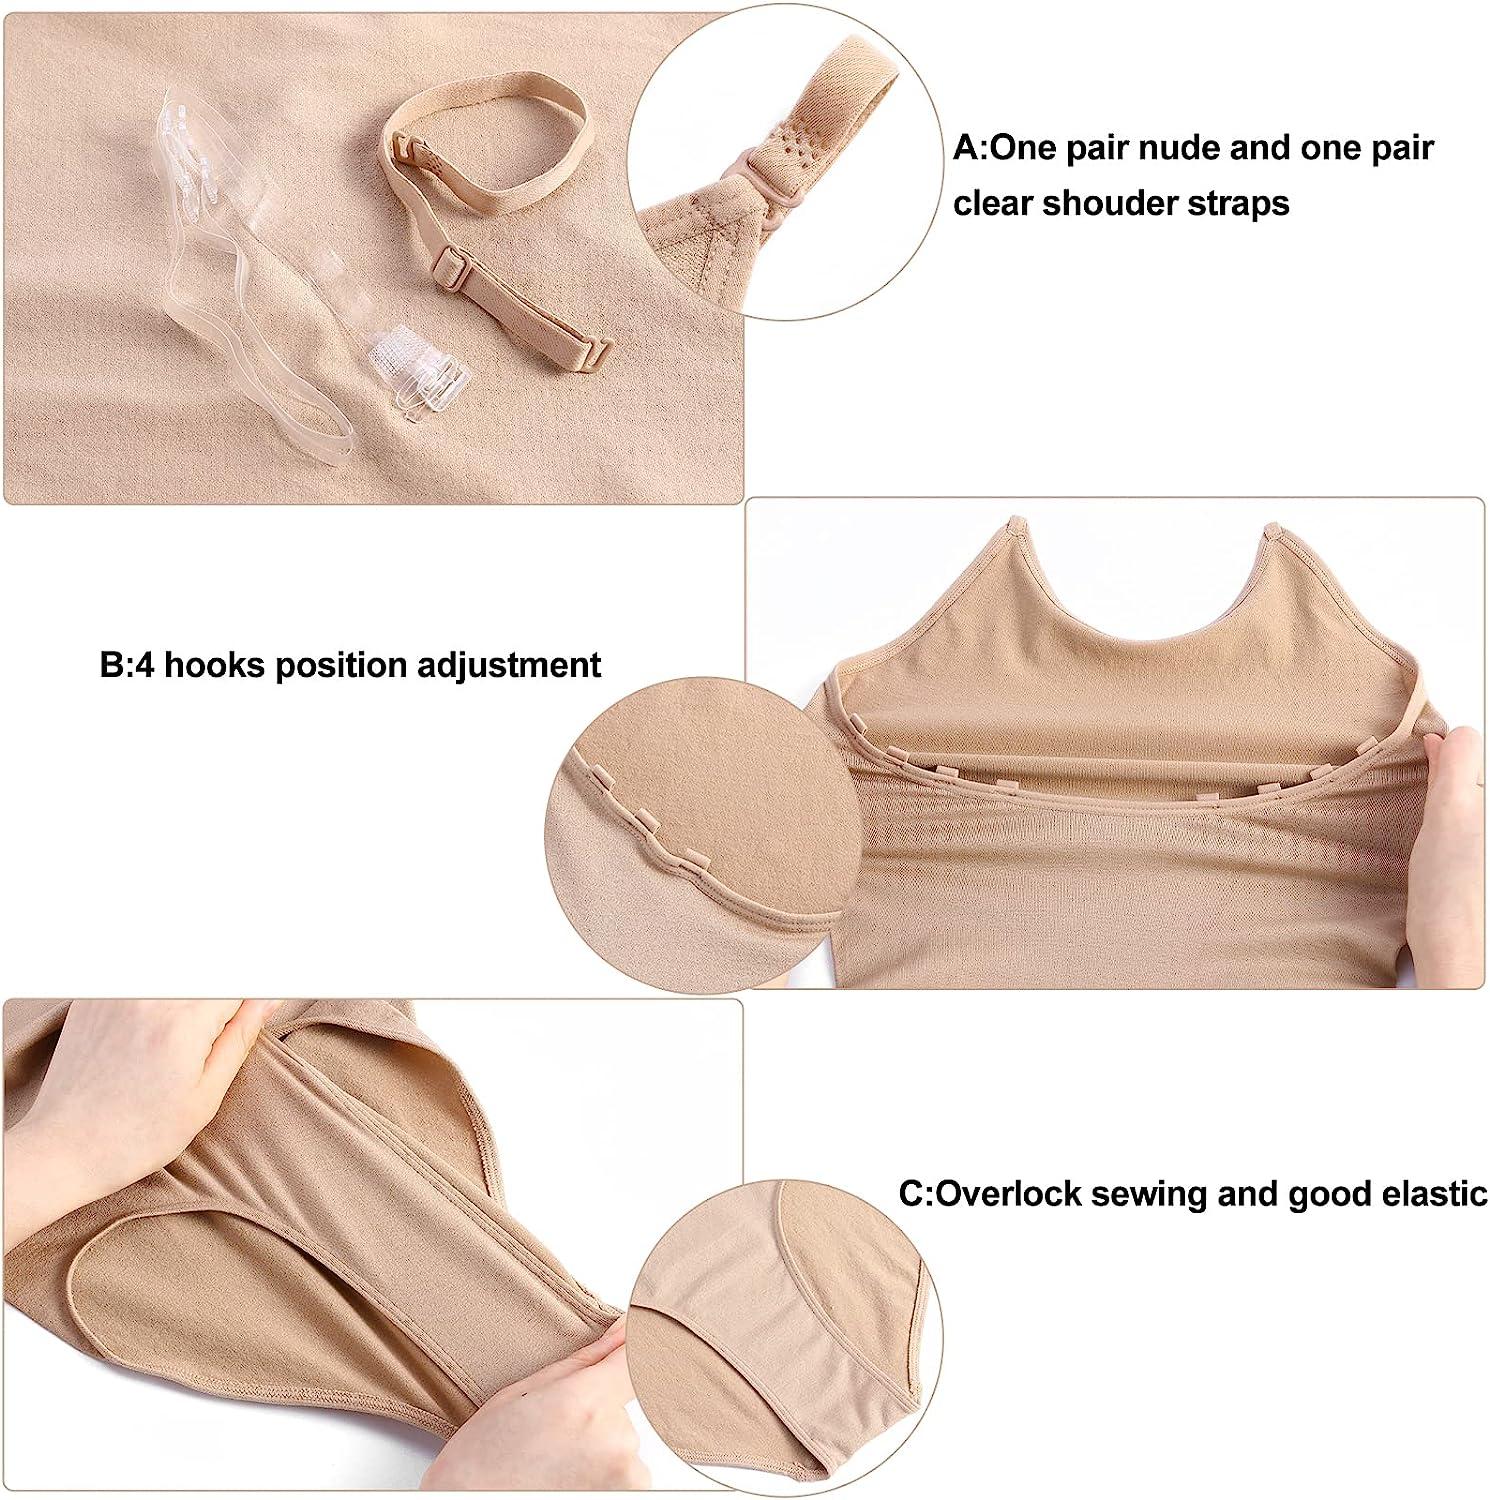 iMucci Professional Women and Girl Seamless Nude Camisole Leotard